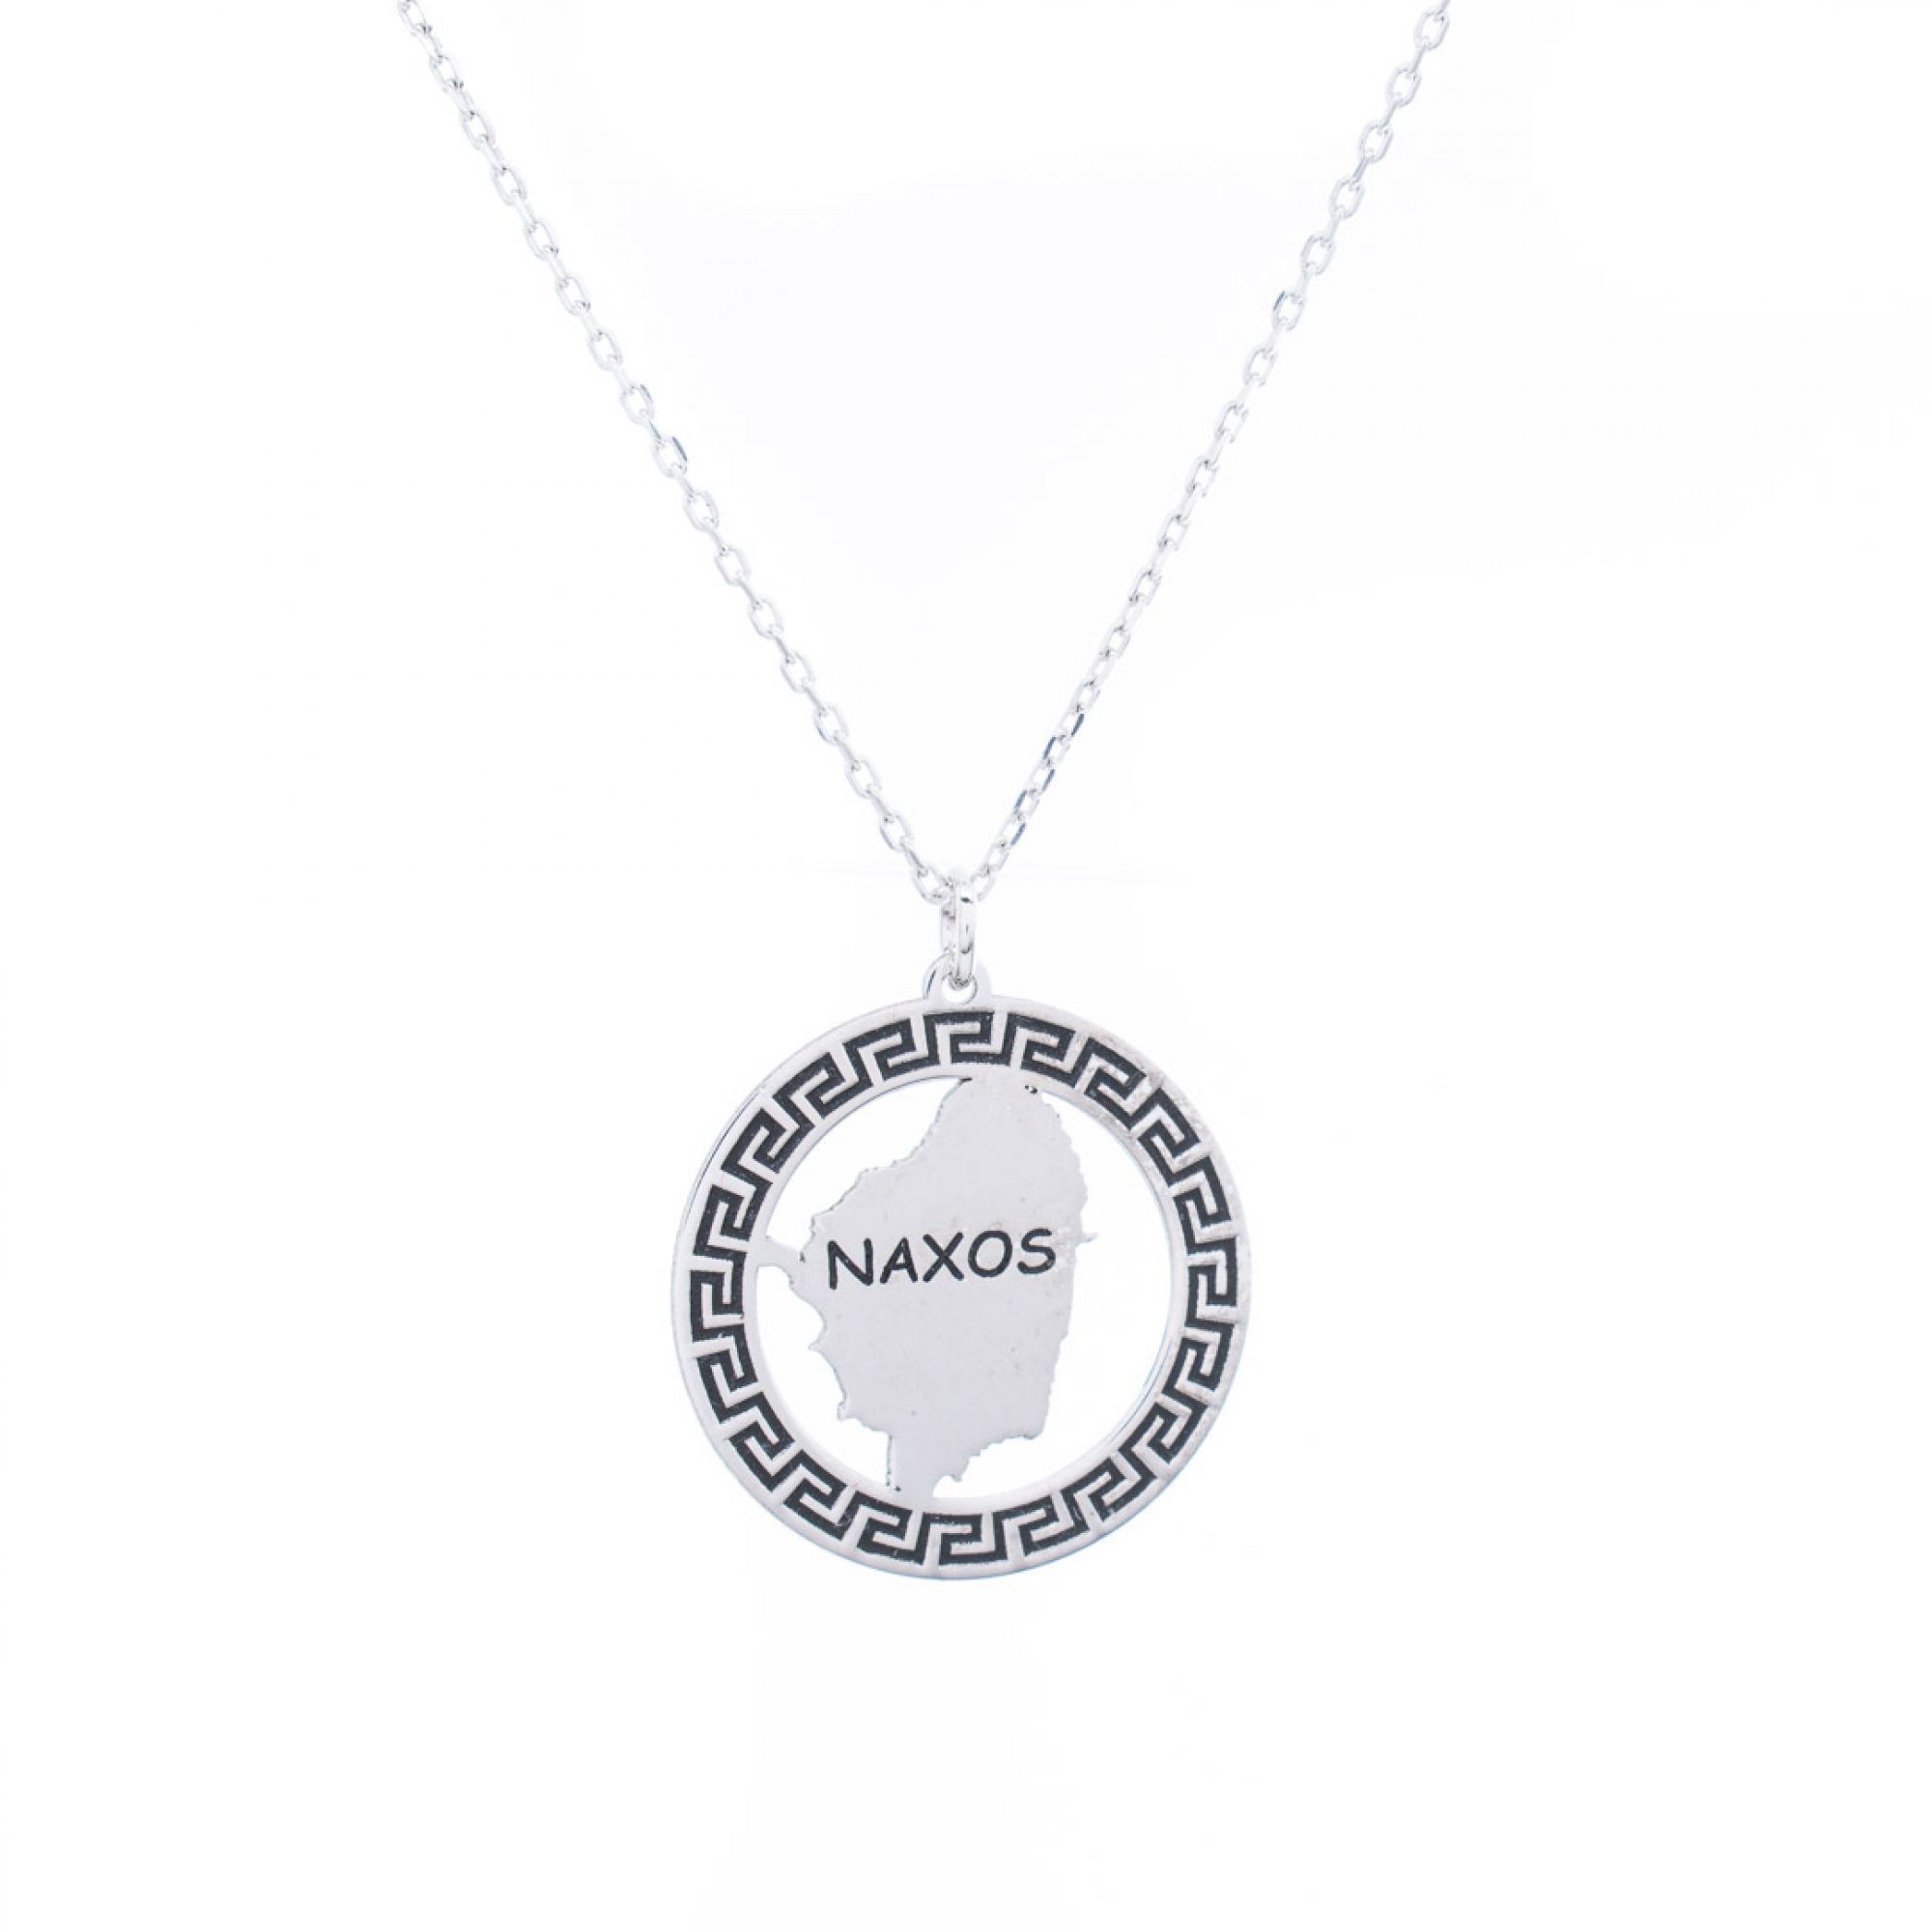 Naxos necklace with meander